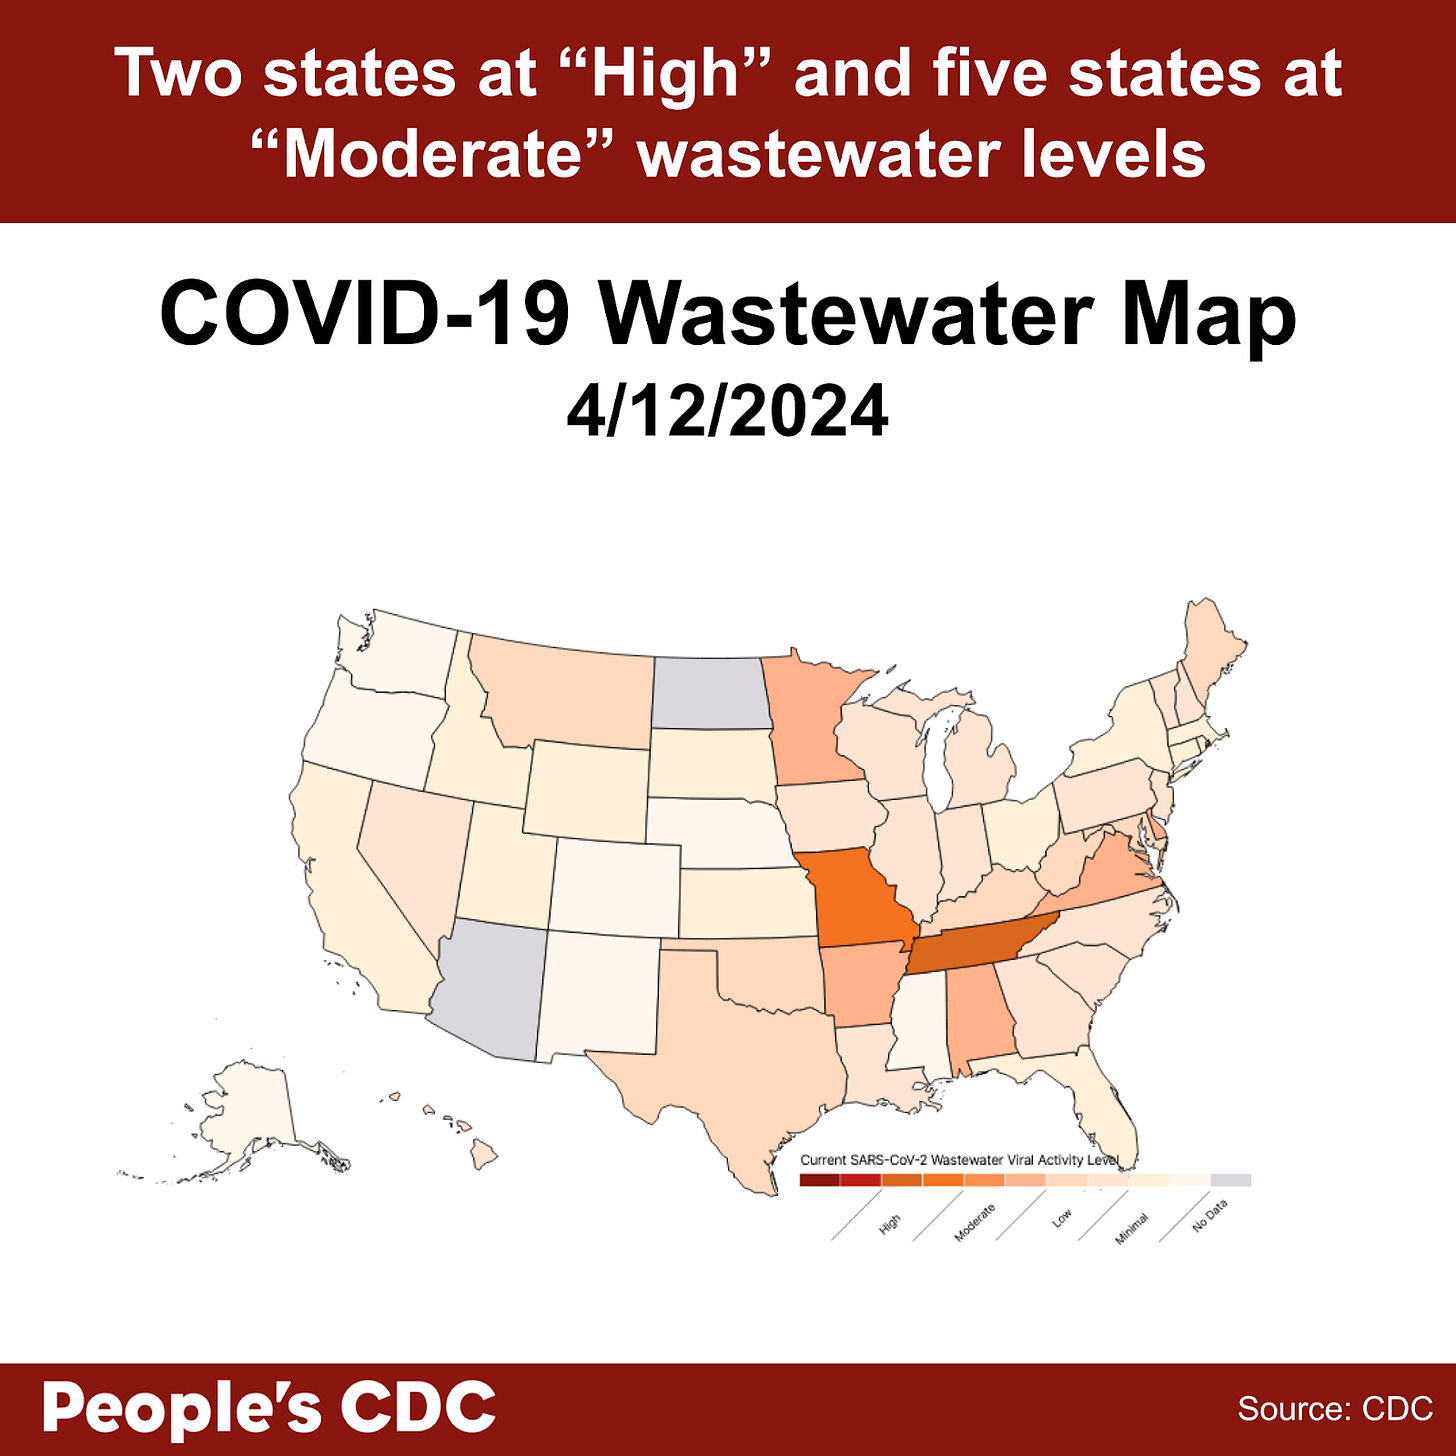 A map of the United States color-coded in shades of orange, and gray displaying SARS-CoV-2 Wastewater Viral Activity level as of April 12, 2024, where deeper tones correlate to higher viral activity and gray indicates insufficient data. Tennessee and Missouri have orange “high” COVID-19 levels, 5 states have ‘Moderate’ Wastewater Levels, and 2 states and 3 territories have insufficient data. Text above map reads “Two states at ‘High’ and 5 states at ‘Moderate’ Wastewater Levels. COVID-19 Wastewater Map 4/12/2024. People’s CDC. Source: CDC.”